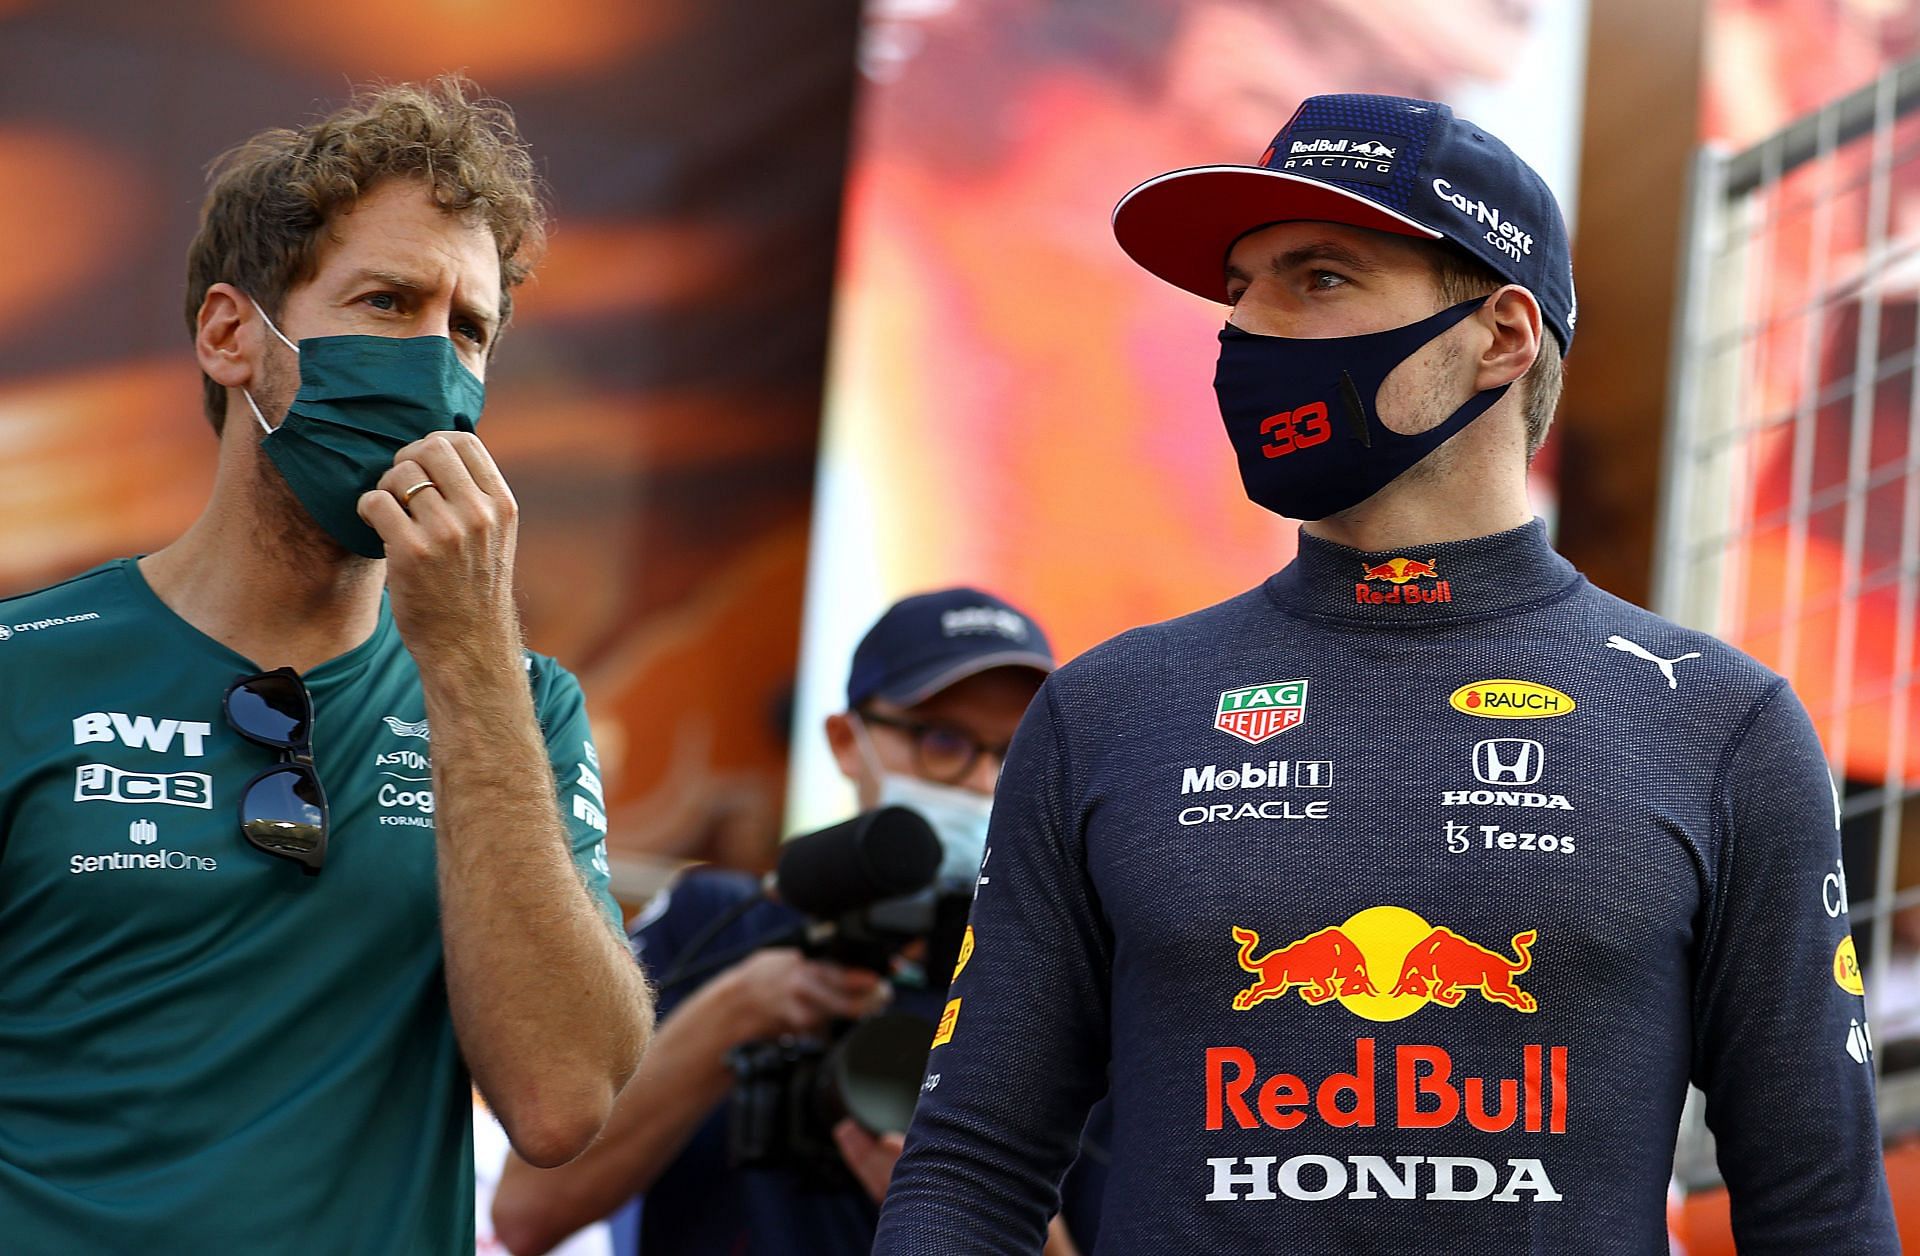 Max Verstappen (right) and Sebastian Vettel (left) in the F1 paddock in Abu Dhabi (Photo by Bryn Lennon/Getty Images)